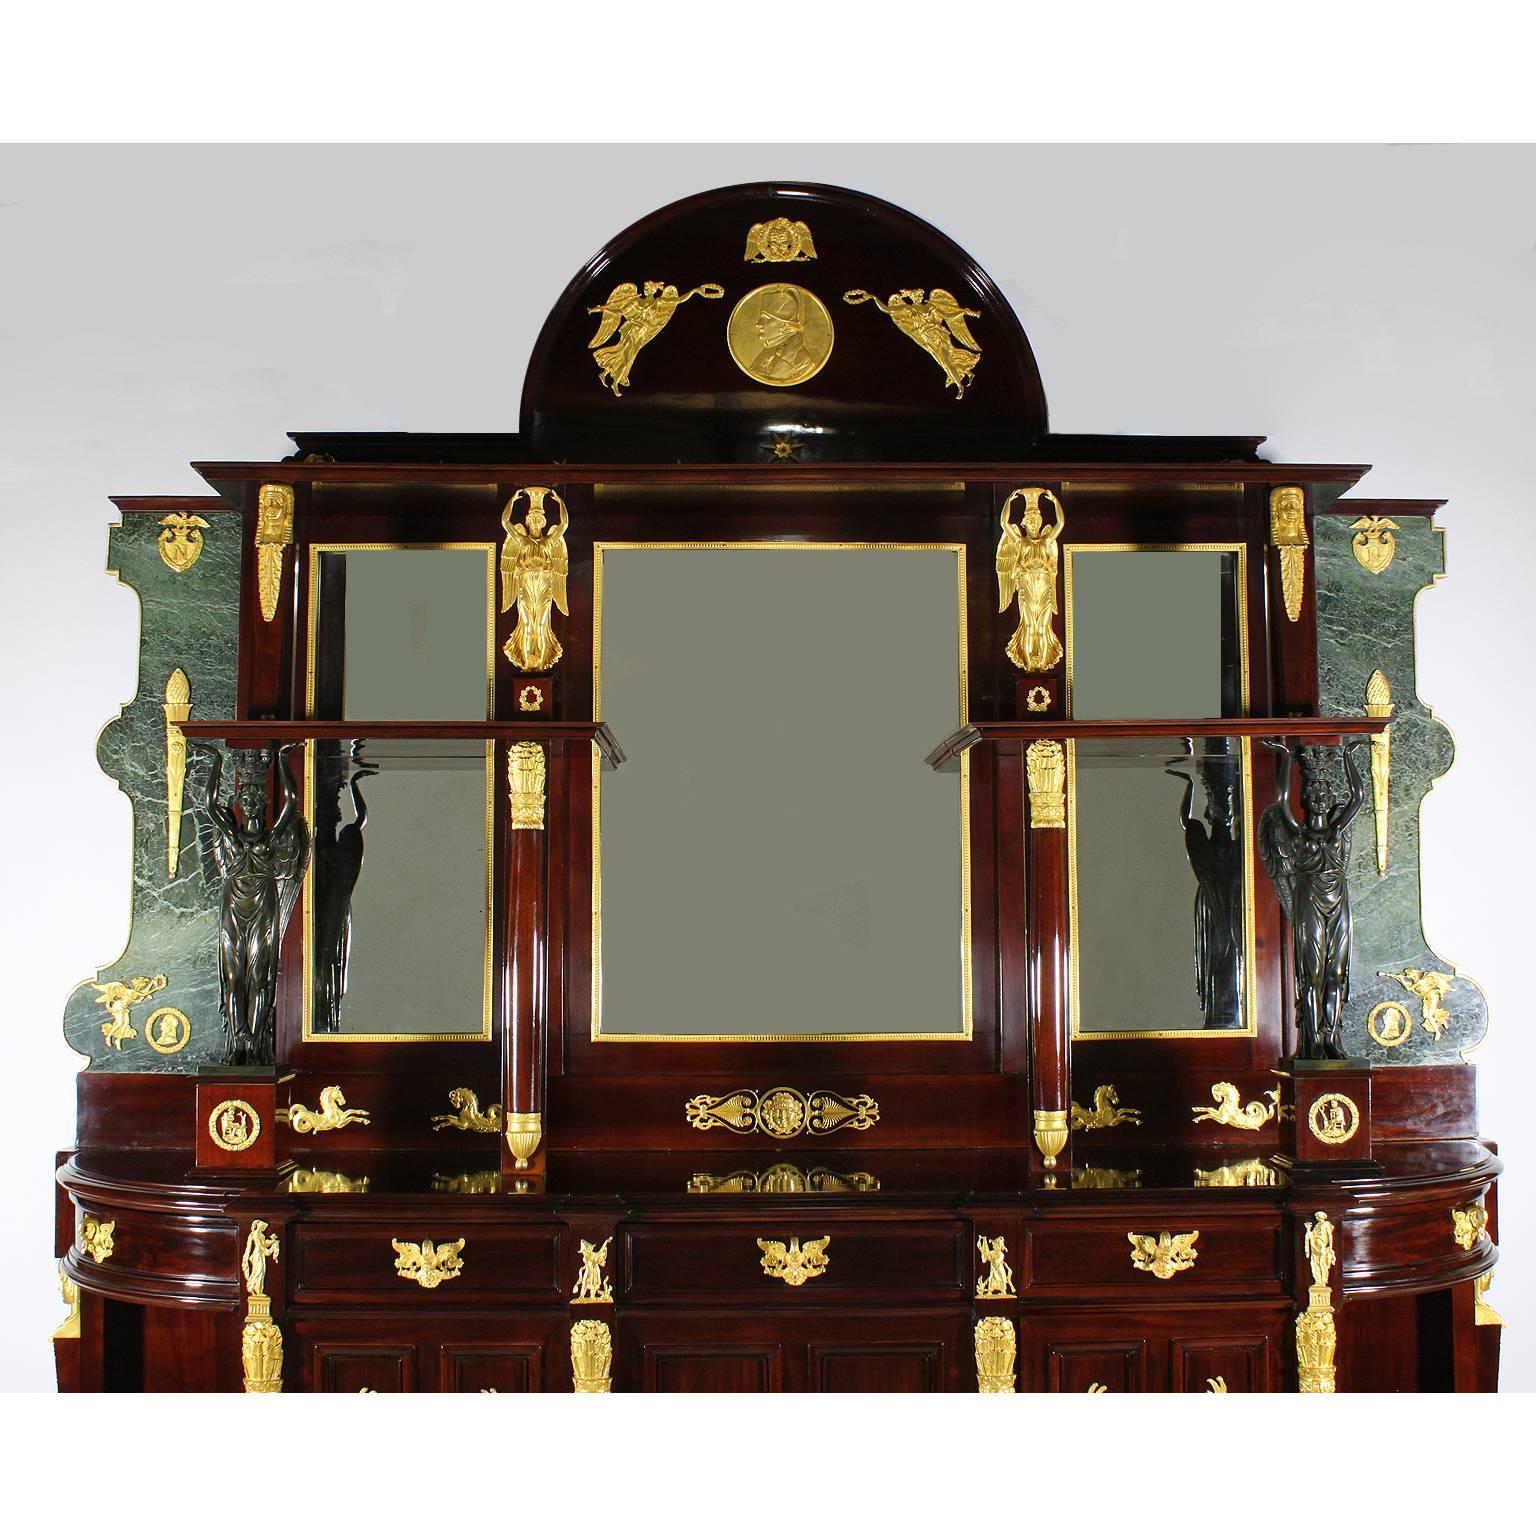 An impressive Napoleon III Empire Revival mahogany, marble, gilt bronze and patinated-bronze-mounted credenza buffet, after Pierre-Philippe Thomire (1751–1843). The large mahogany and green marble upper body with a domed top centred with a circular